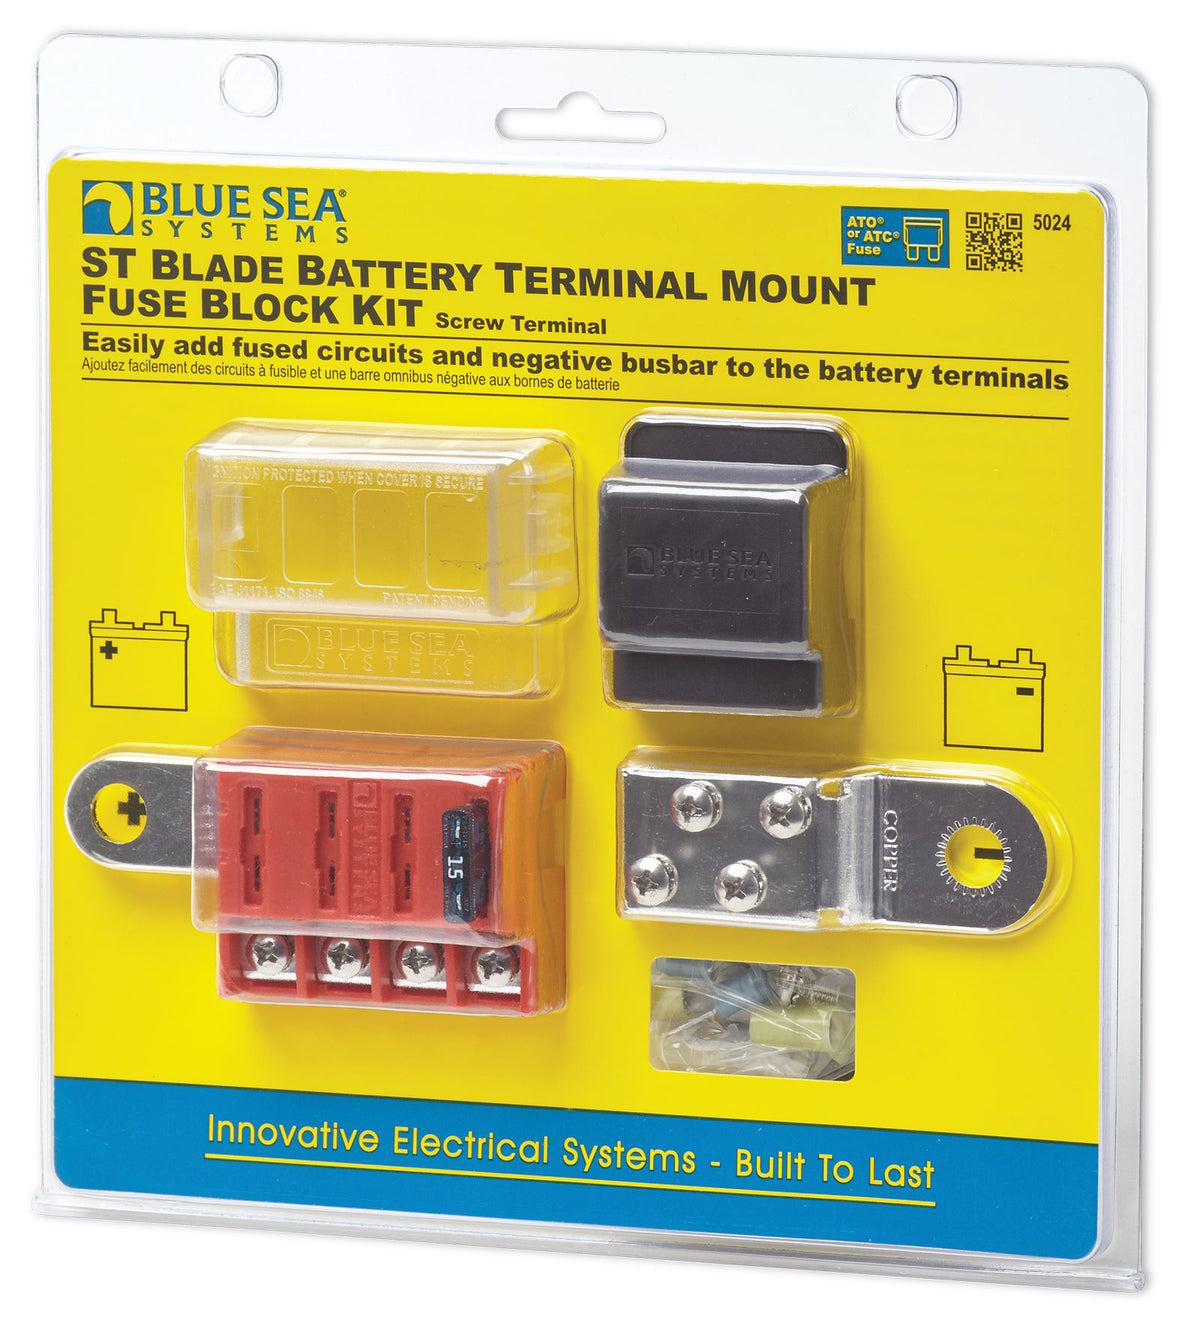 Blue Sea Systems ST Blade Battery Terminal Mount Fuse Block Kit 5024